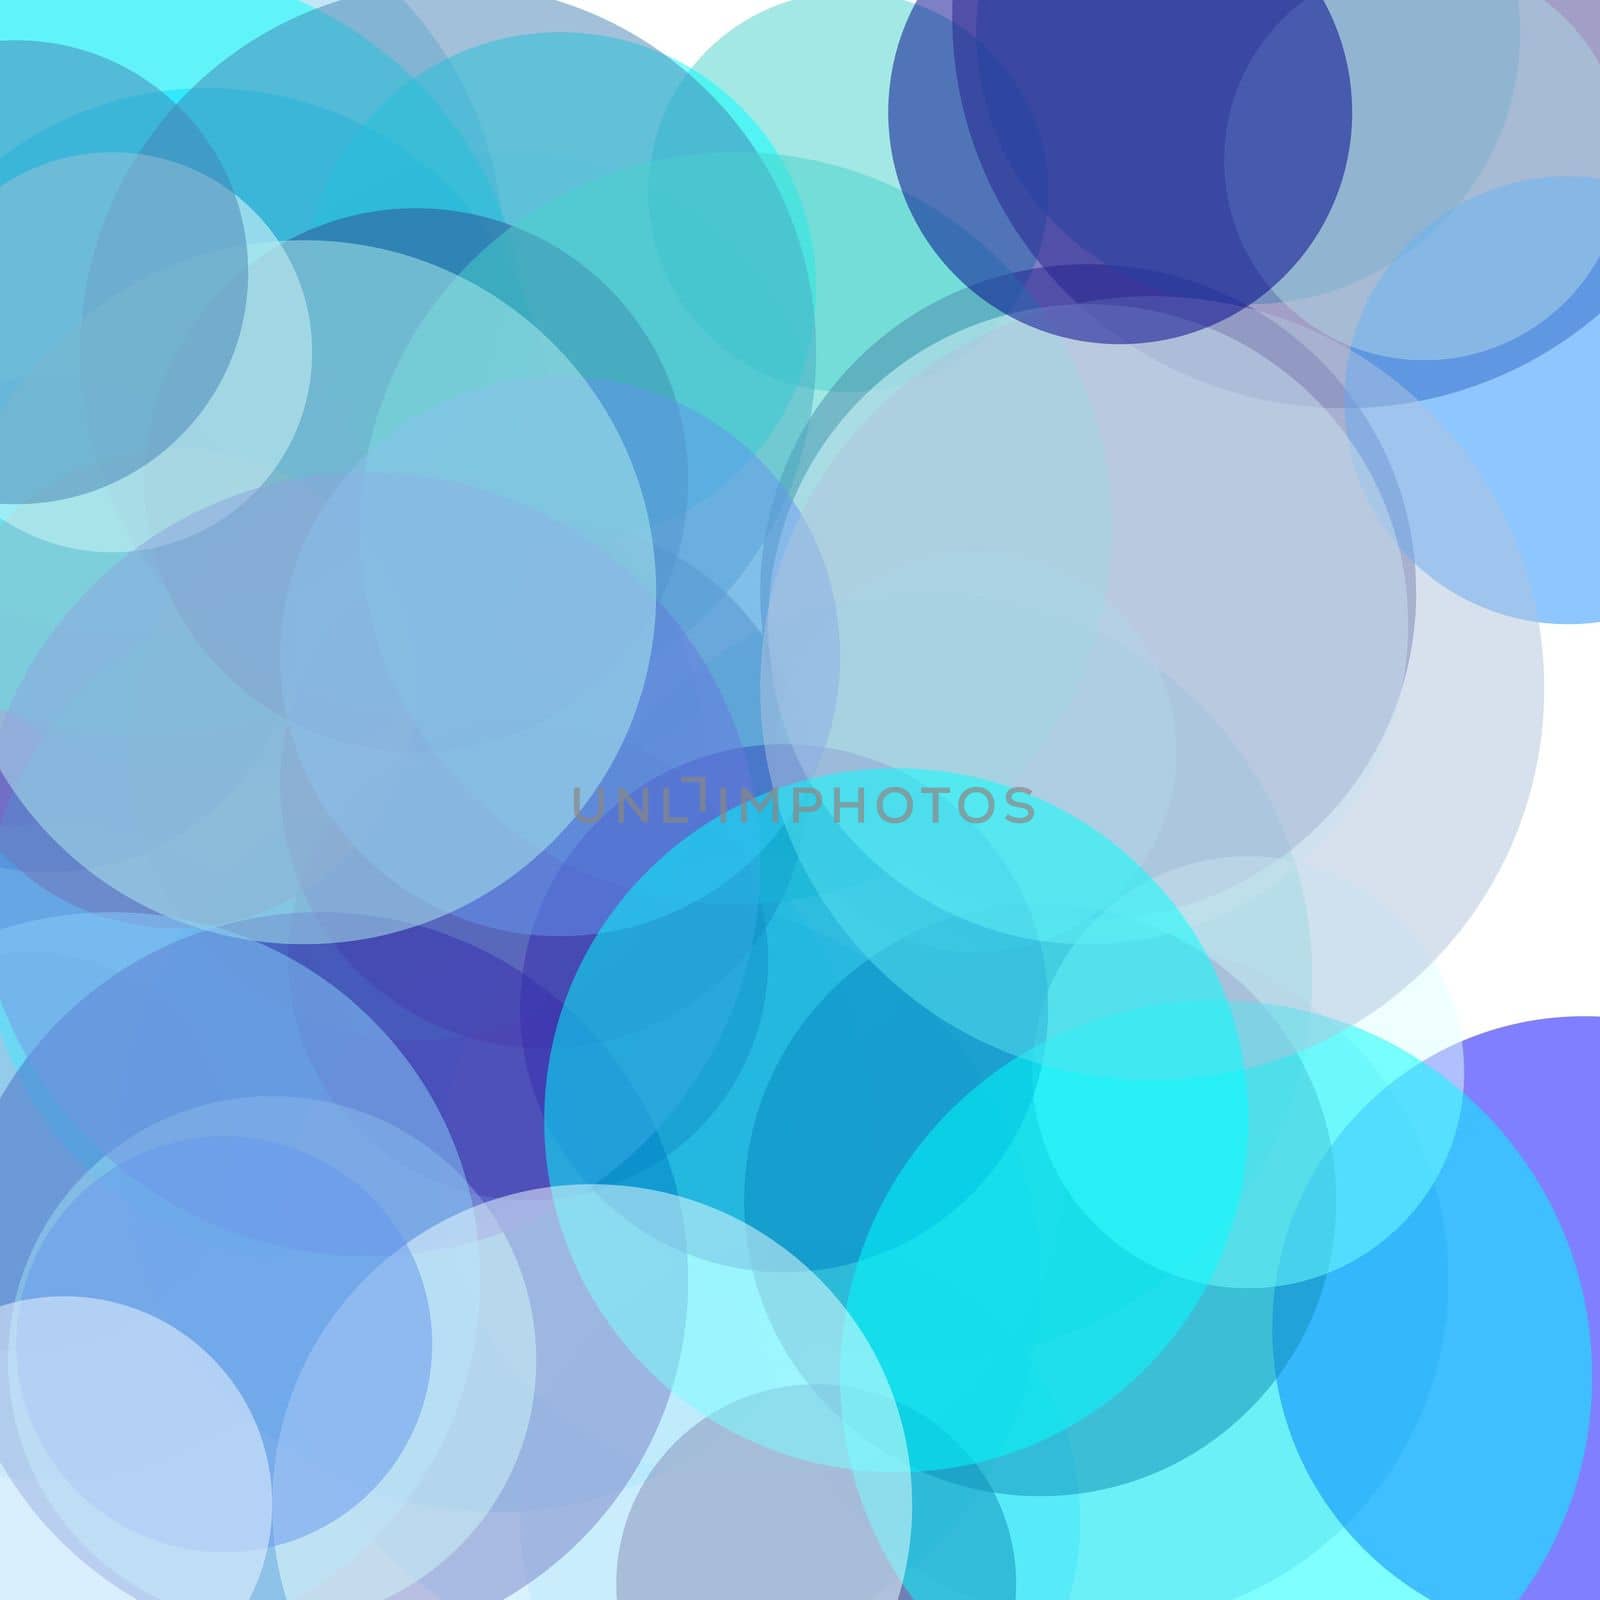 Abstract blue circles illustration background by claudiodivizia